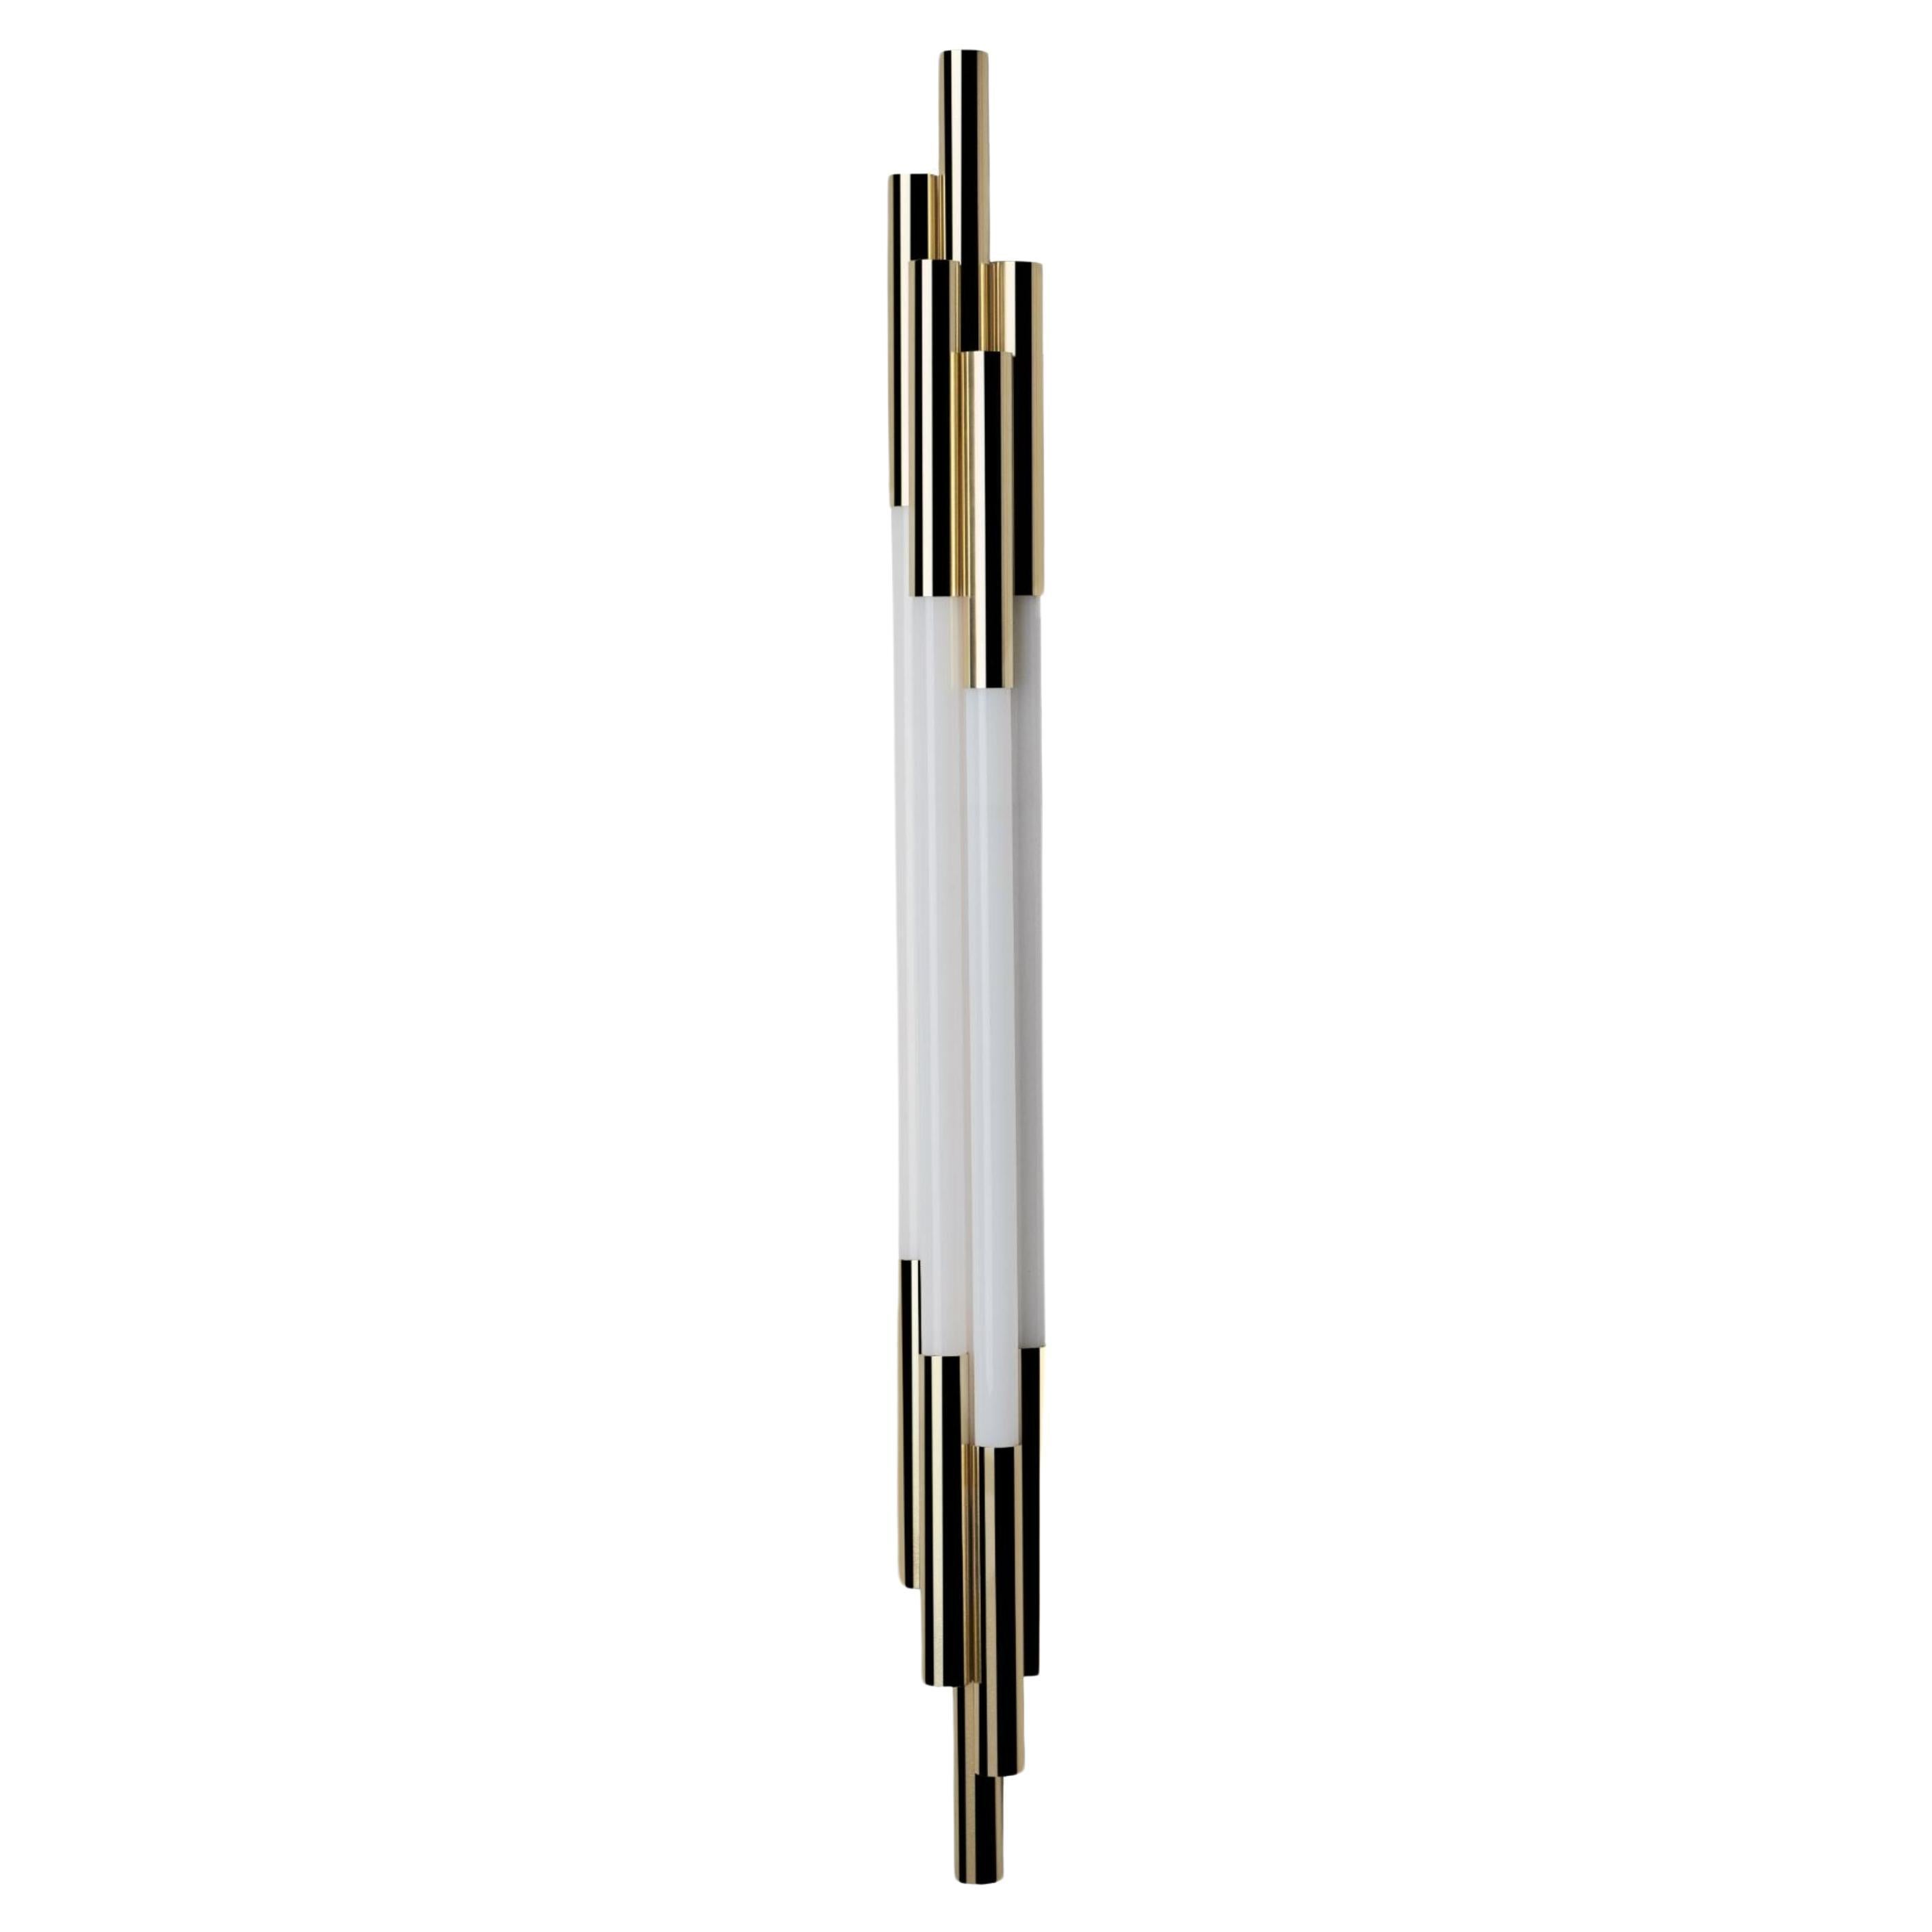 DCW Editions Org Wall Lamp 1050 in Aluminium and Glass by Sebastian Summa For Sale